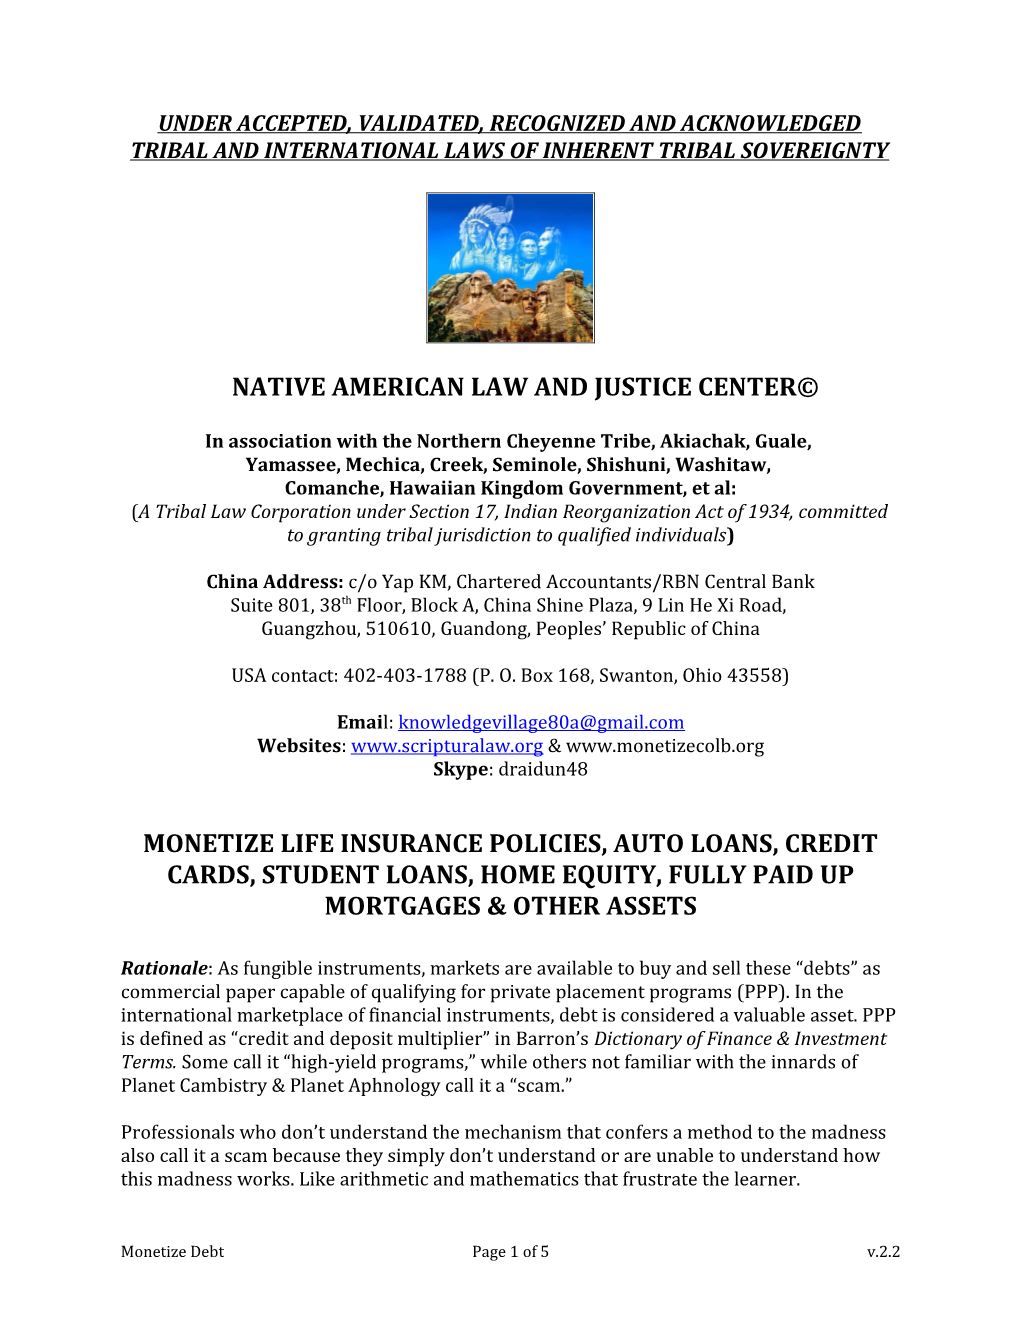 Native American Law and Justice Center